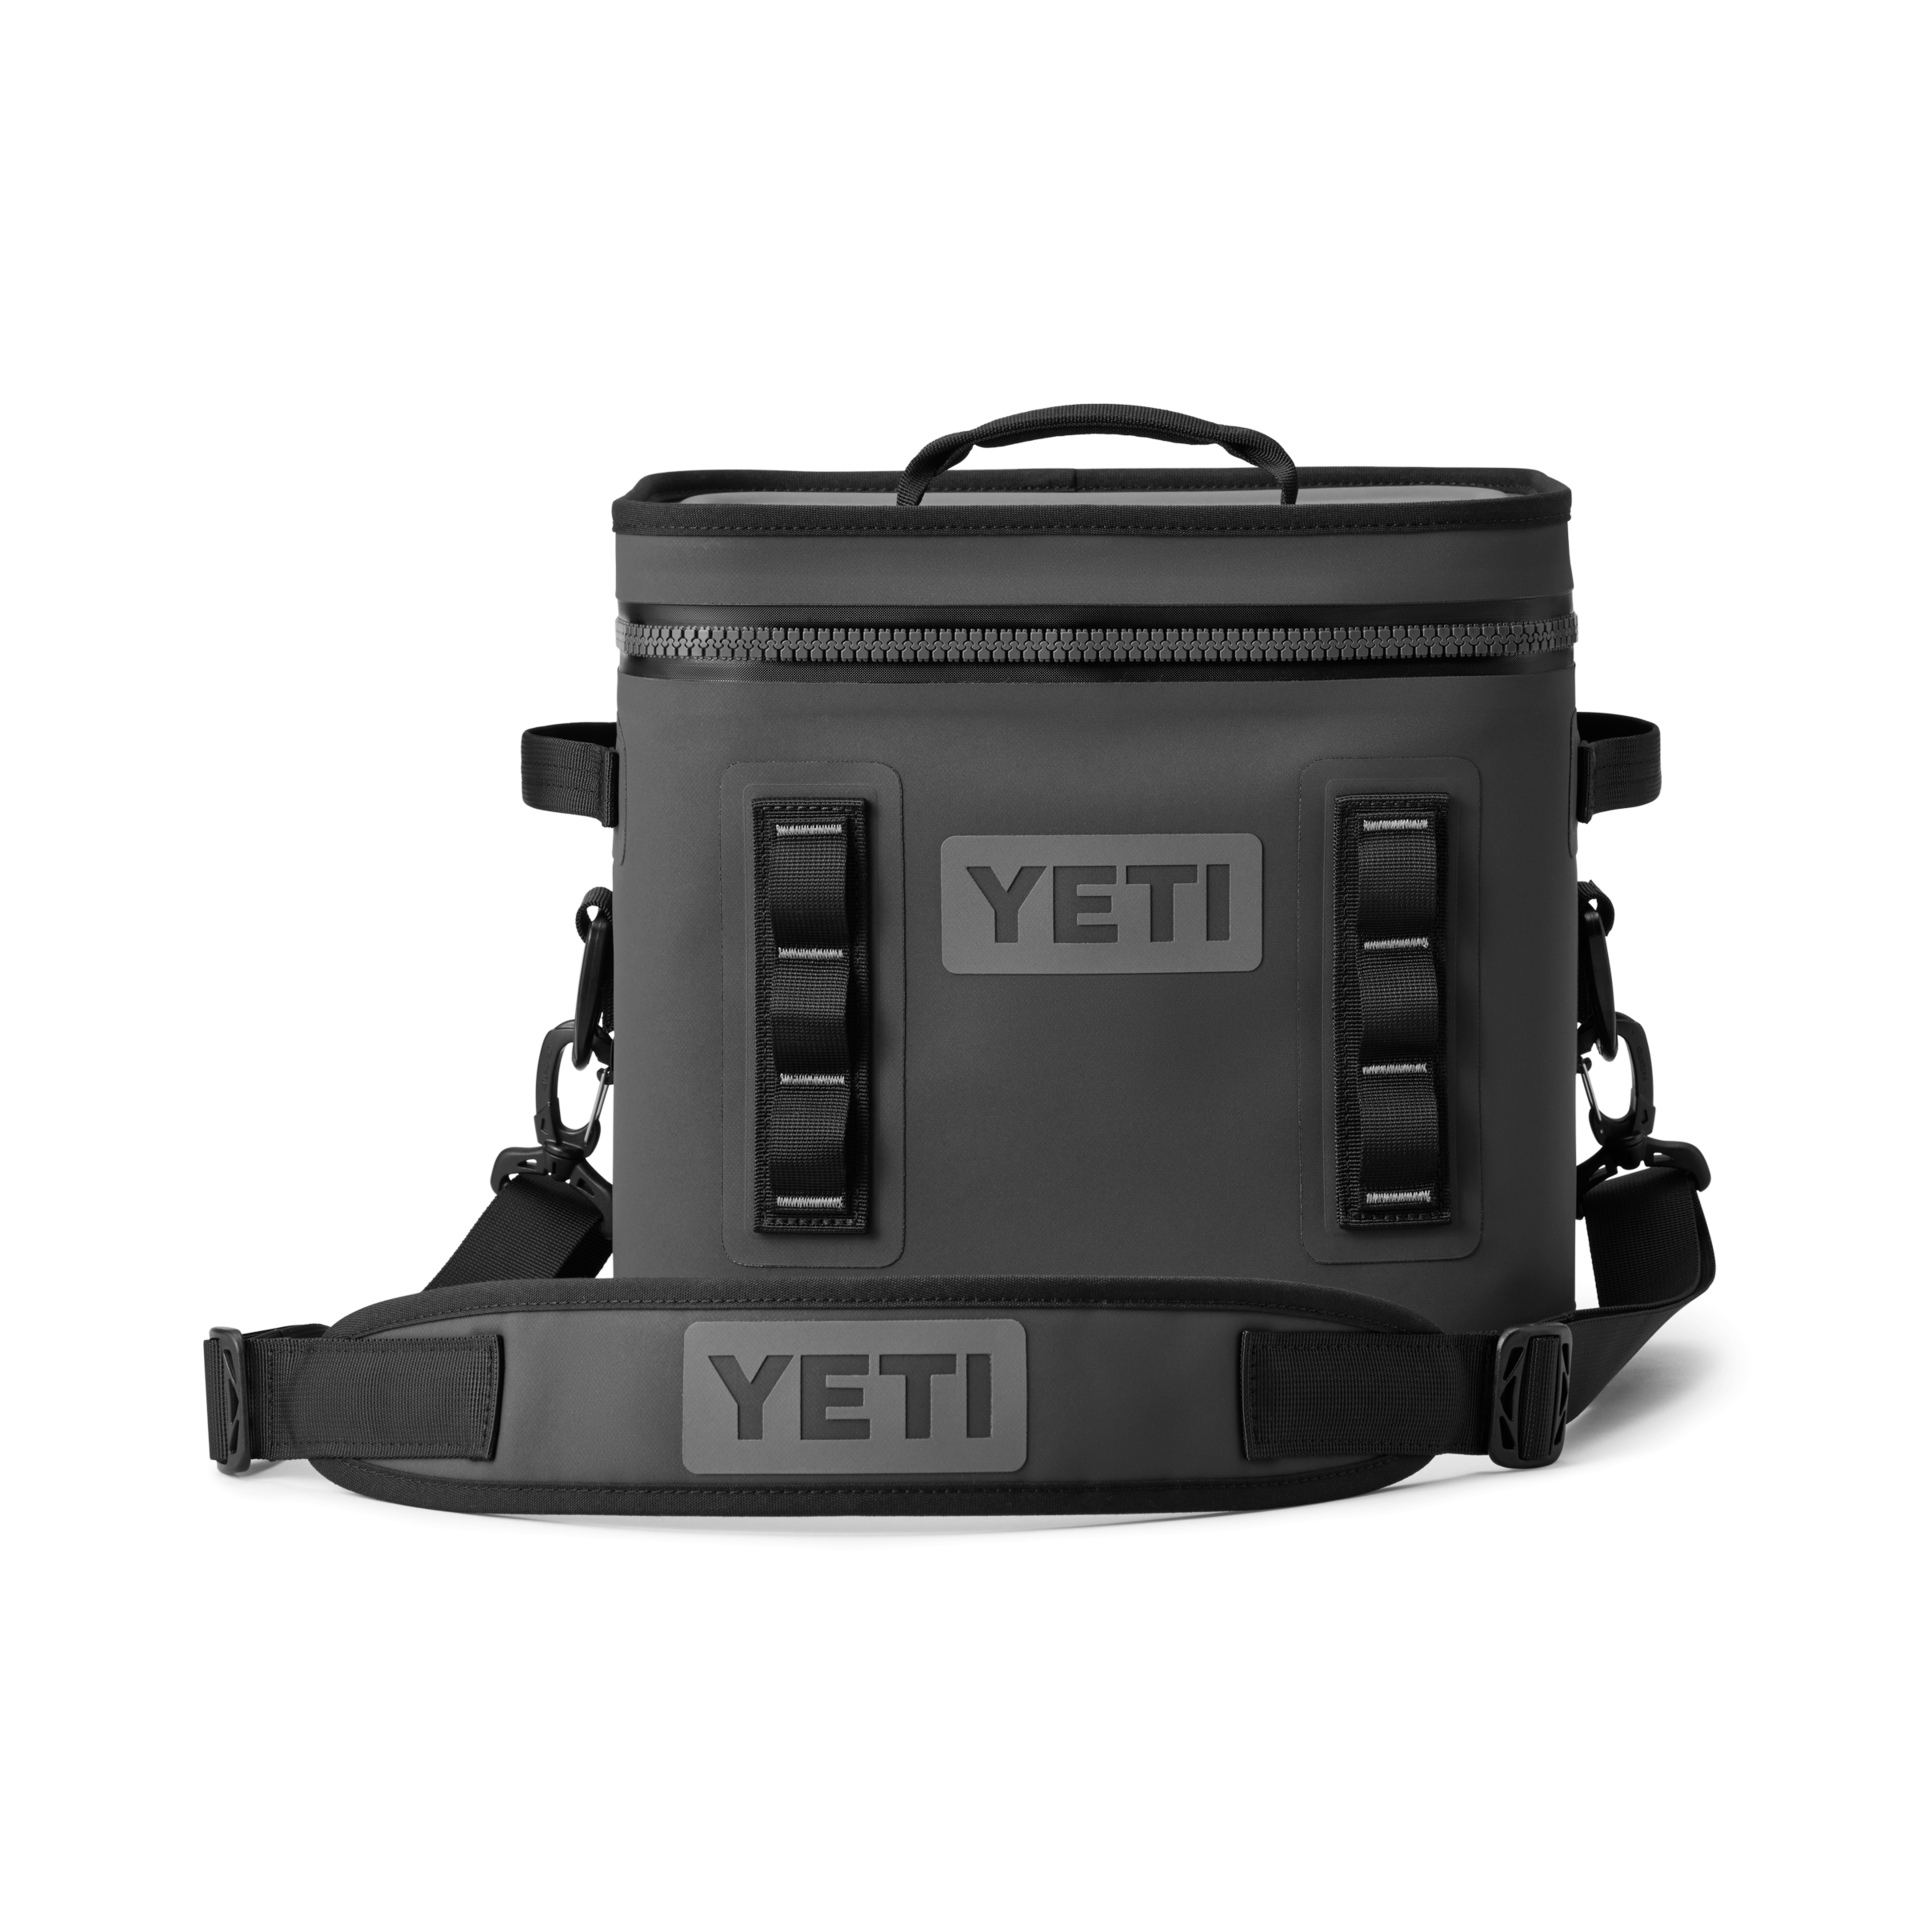 Yeti Launches New Wine Chiller Just in Time for Holiday Entertaining